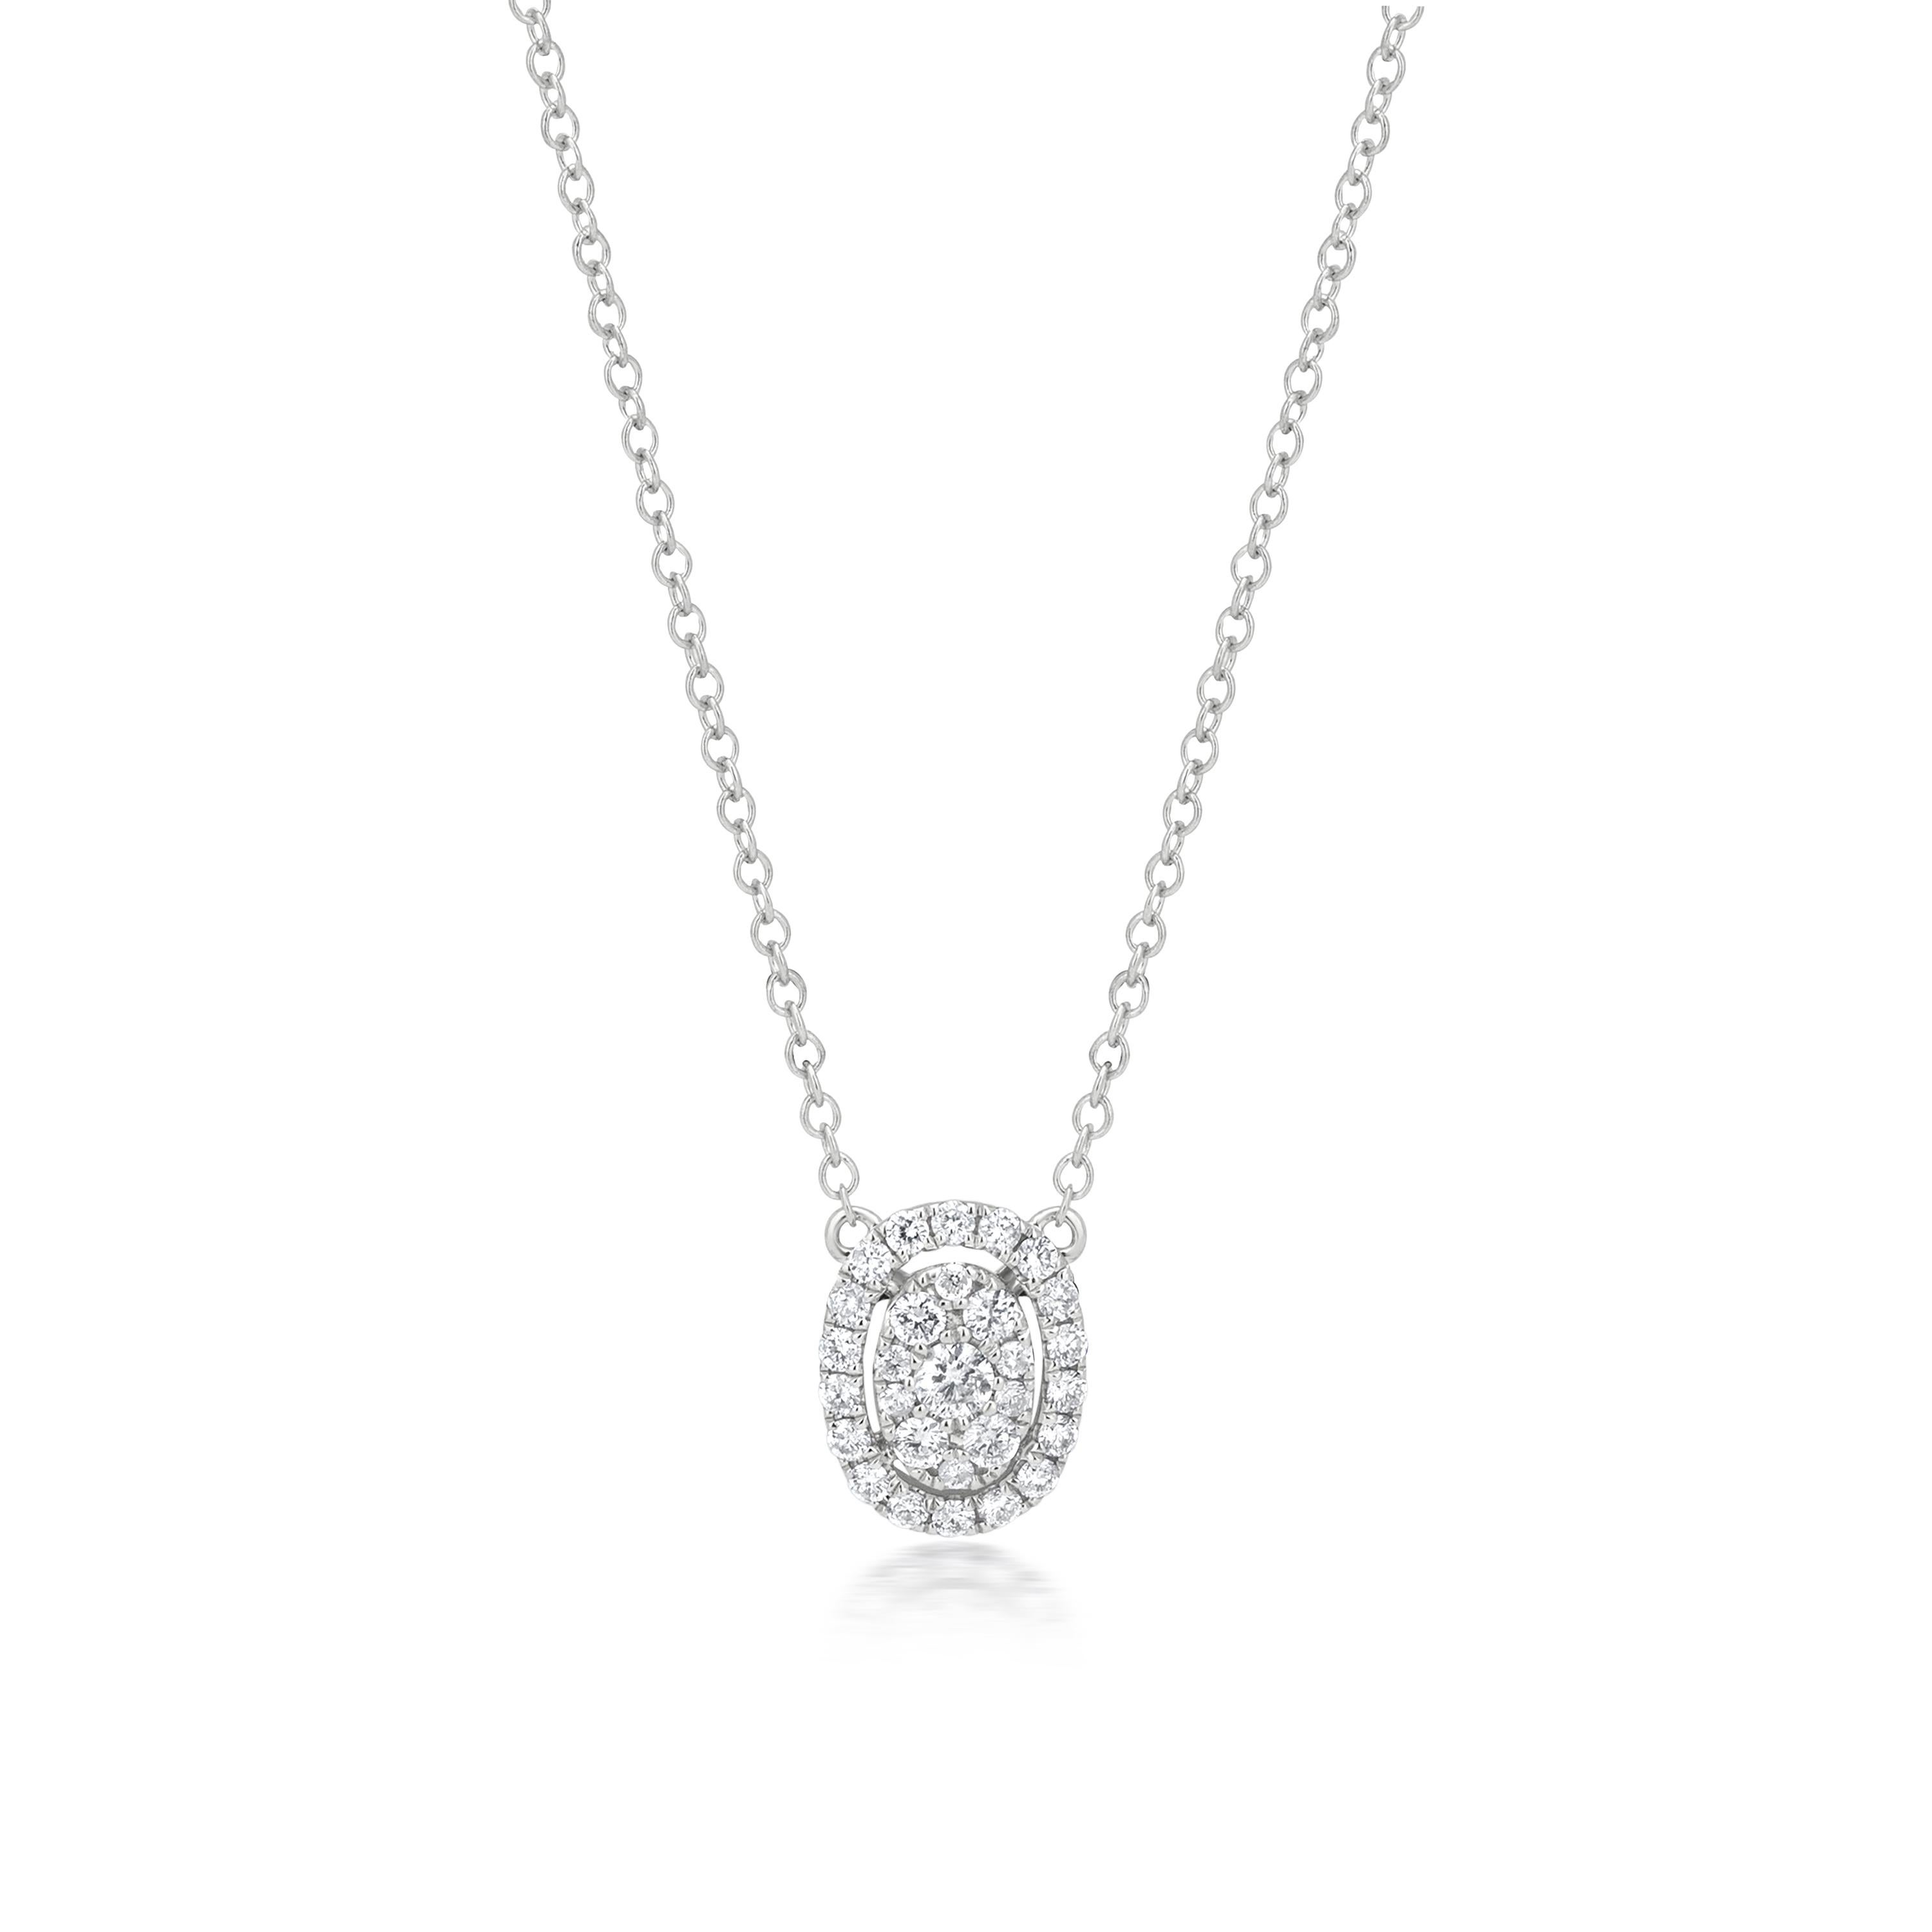 Luxle oval-shaped diamond cluster pendant that hangs from your neckline represents that you give each other the future, whatever it may contain. The new fashion statement is this cluster pendant necklace, which is subtle yet lovely. The pendant on